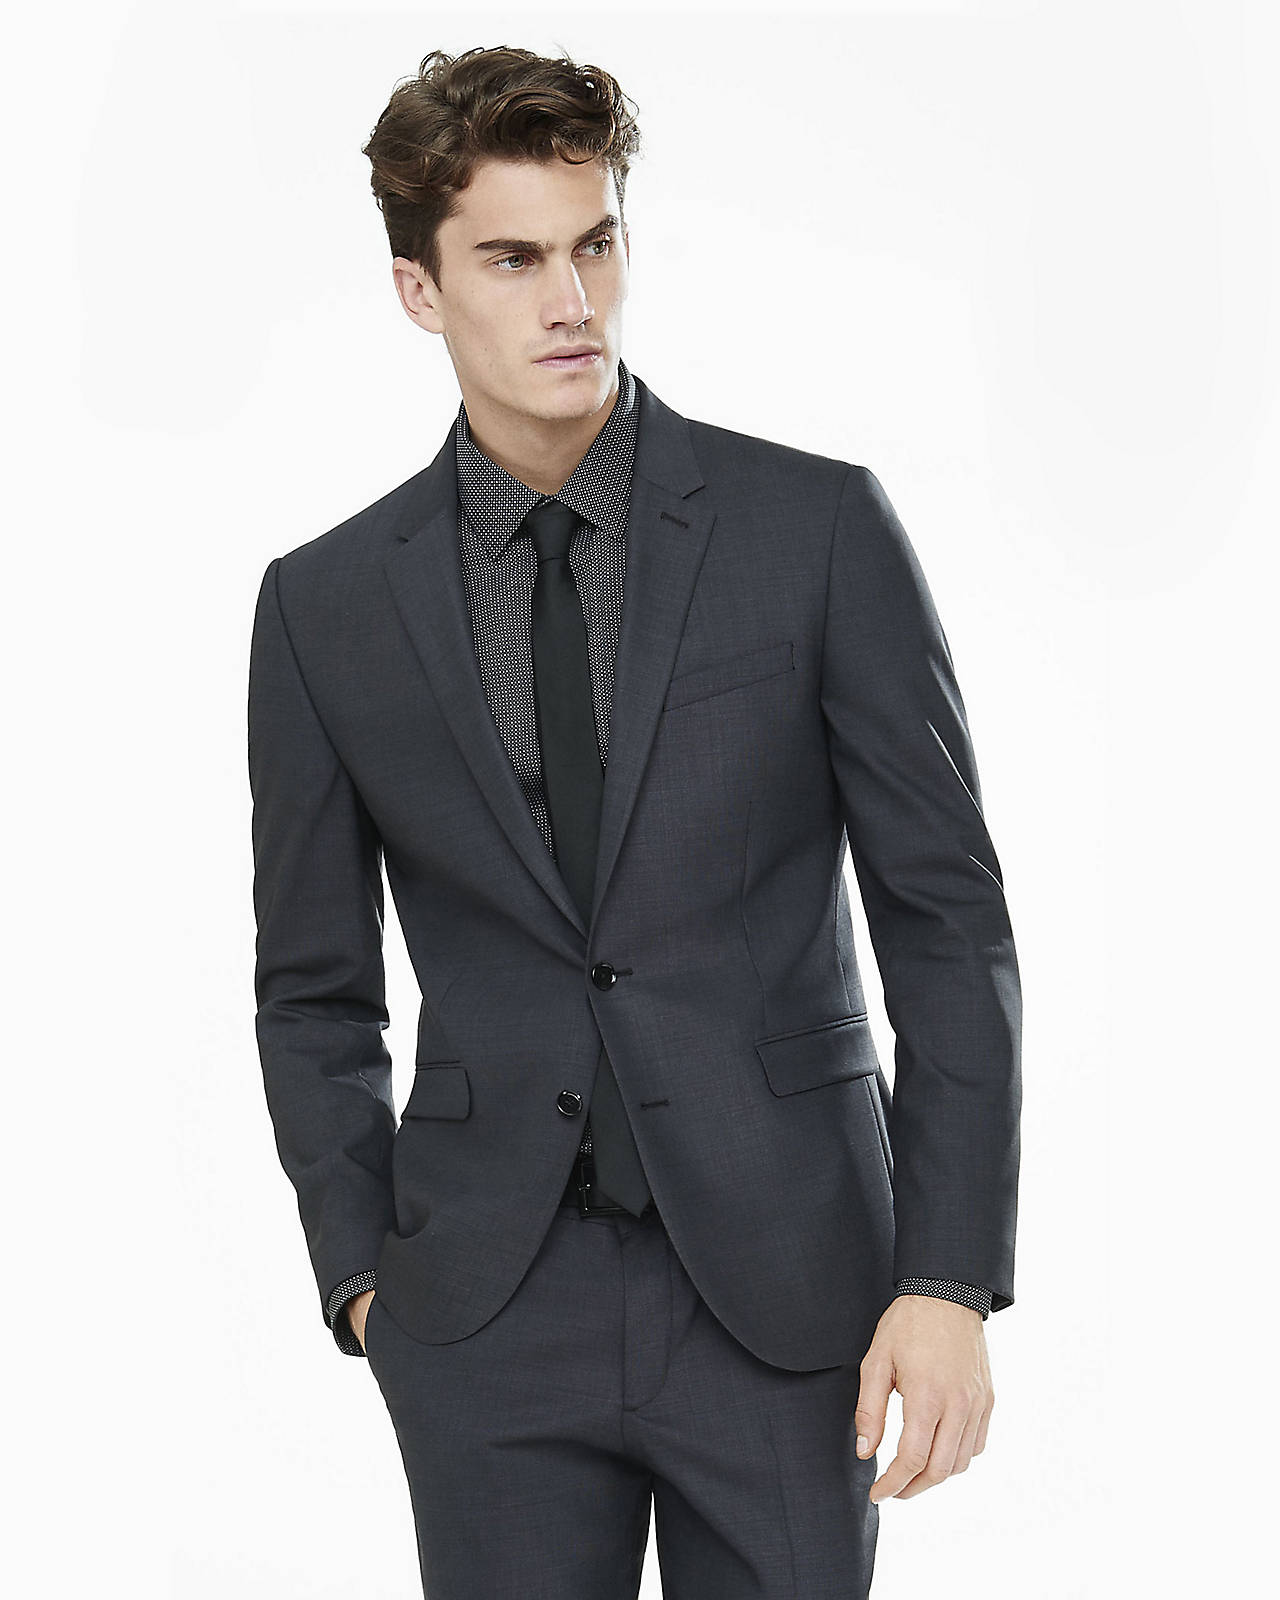 Men's Wedding Style Guide: Express' Classic Looks